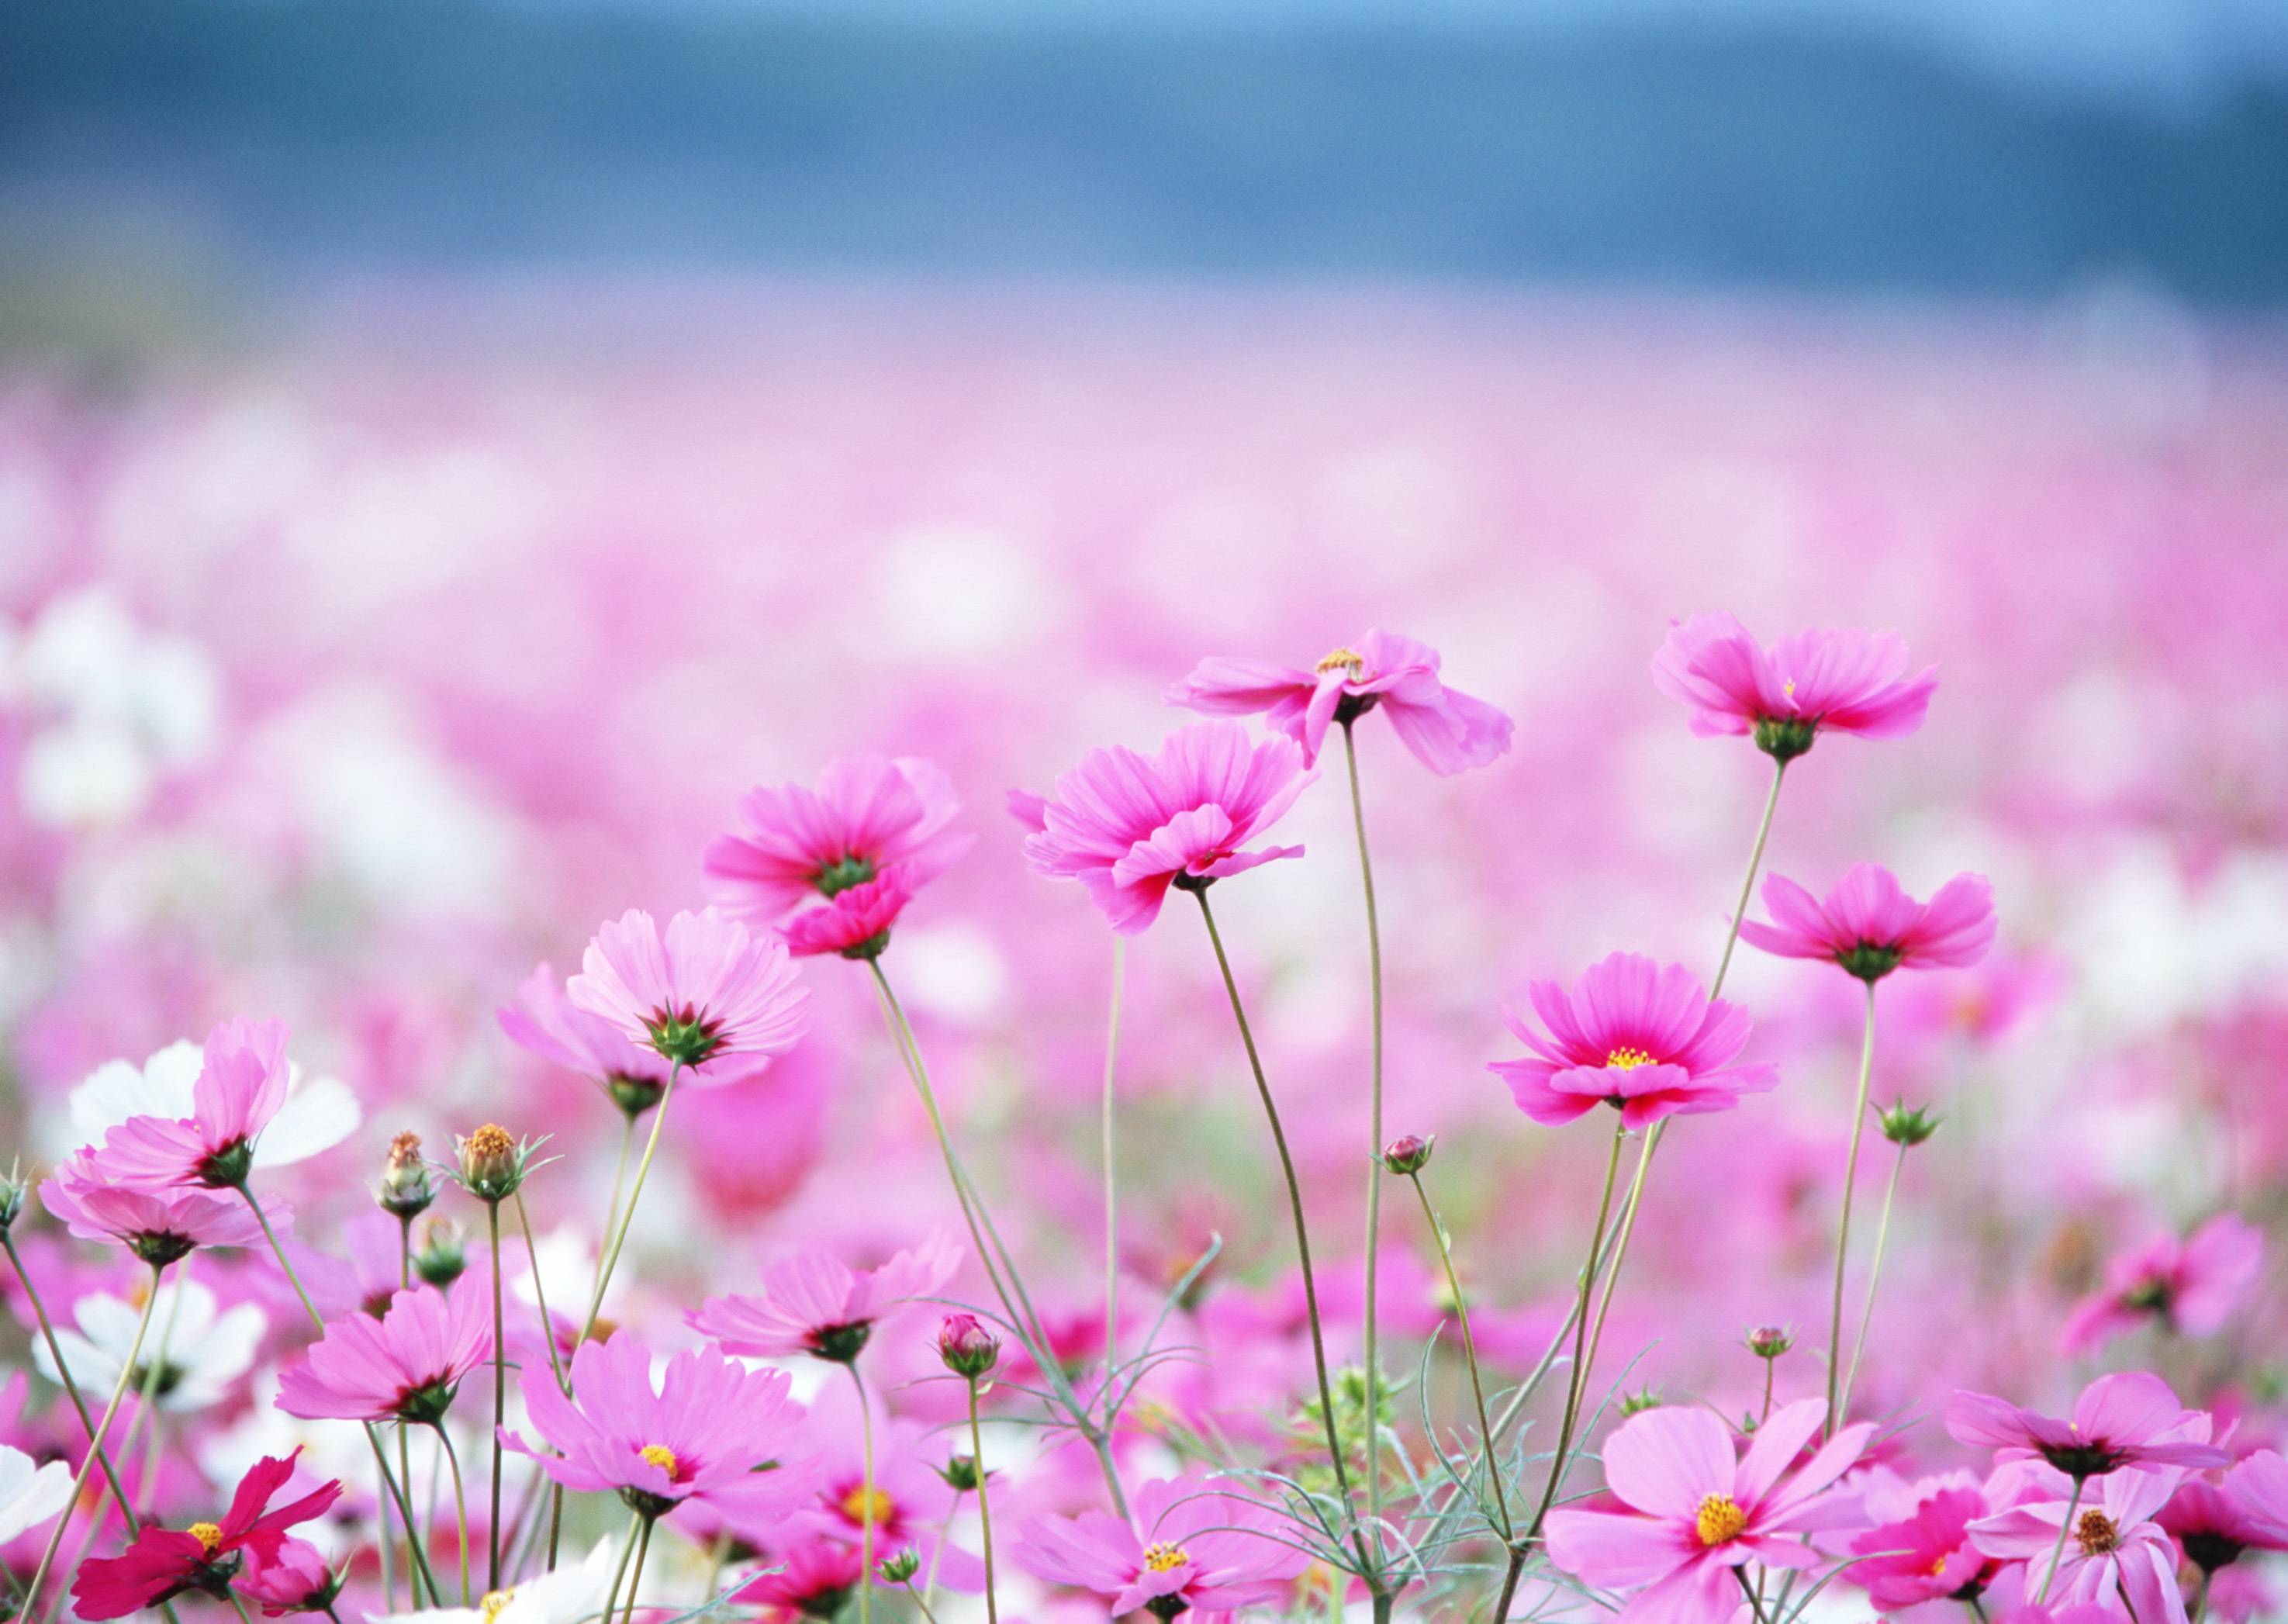 Pink daisy in summer wallpaper and image, picture